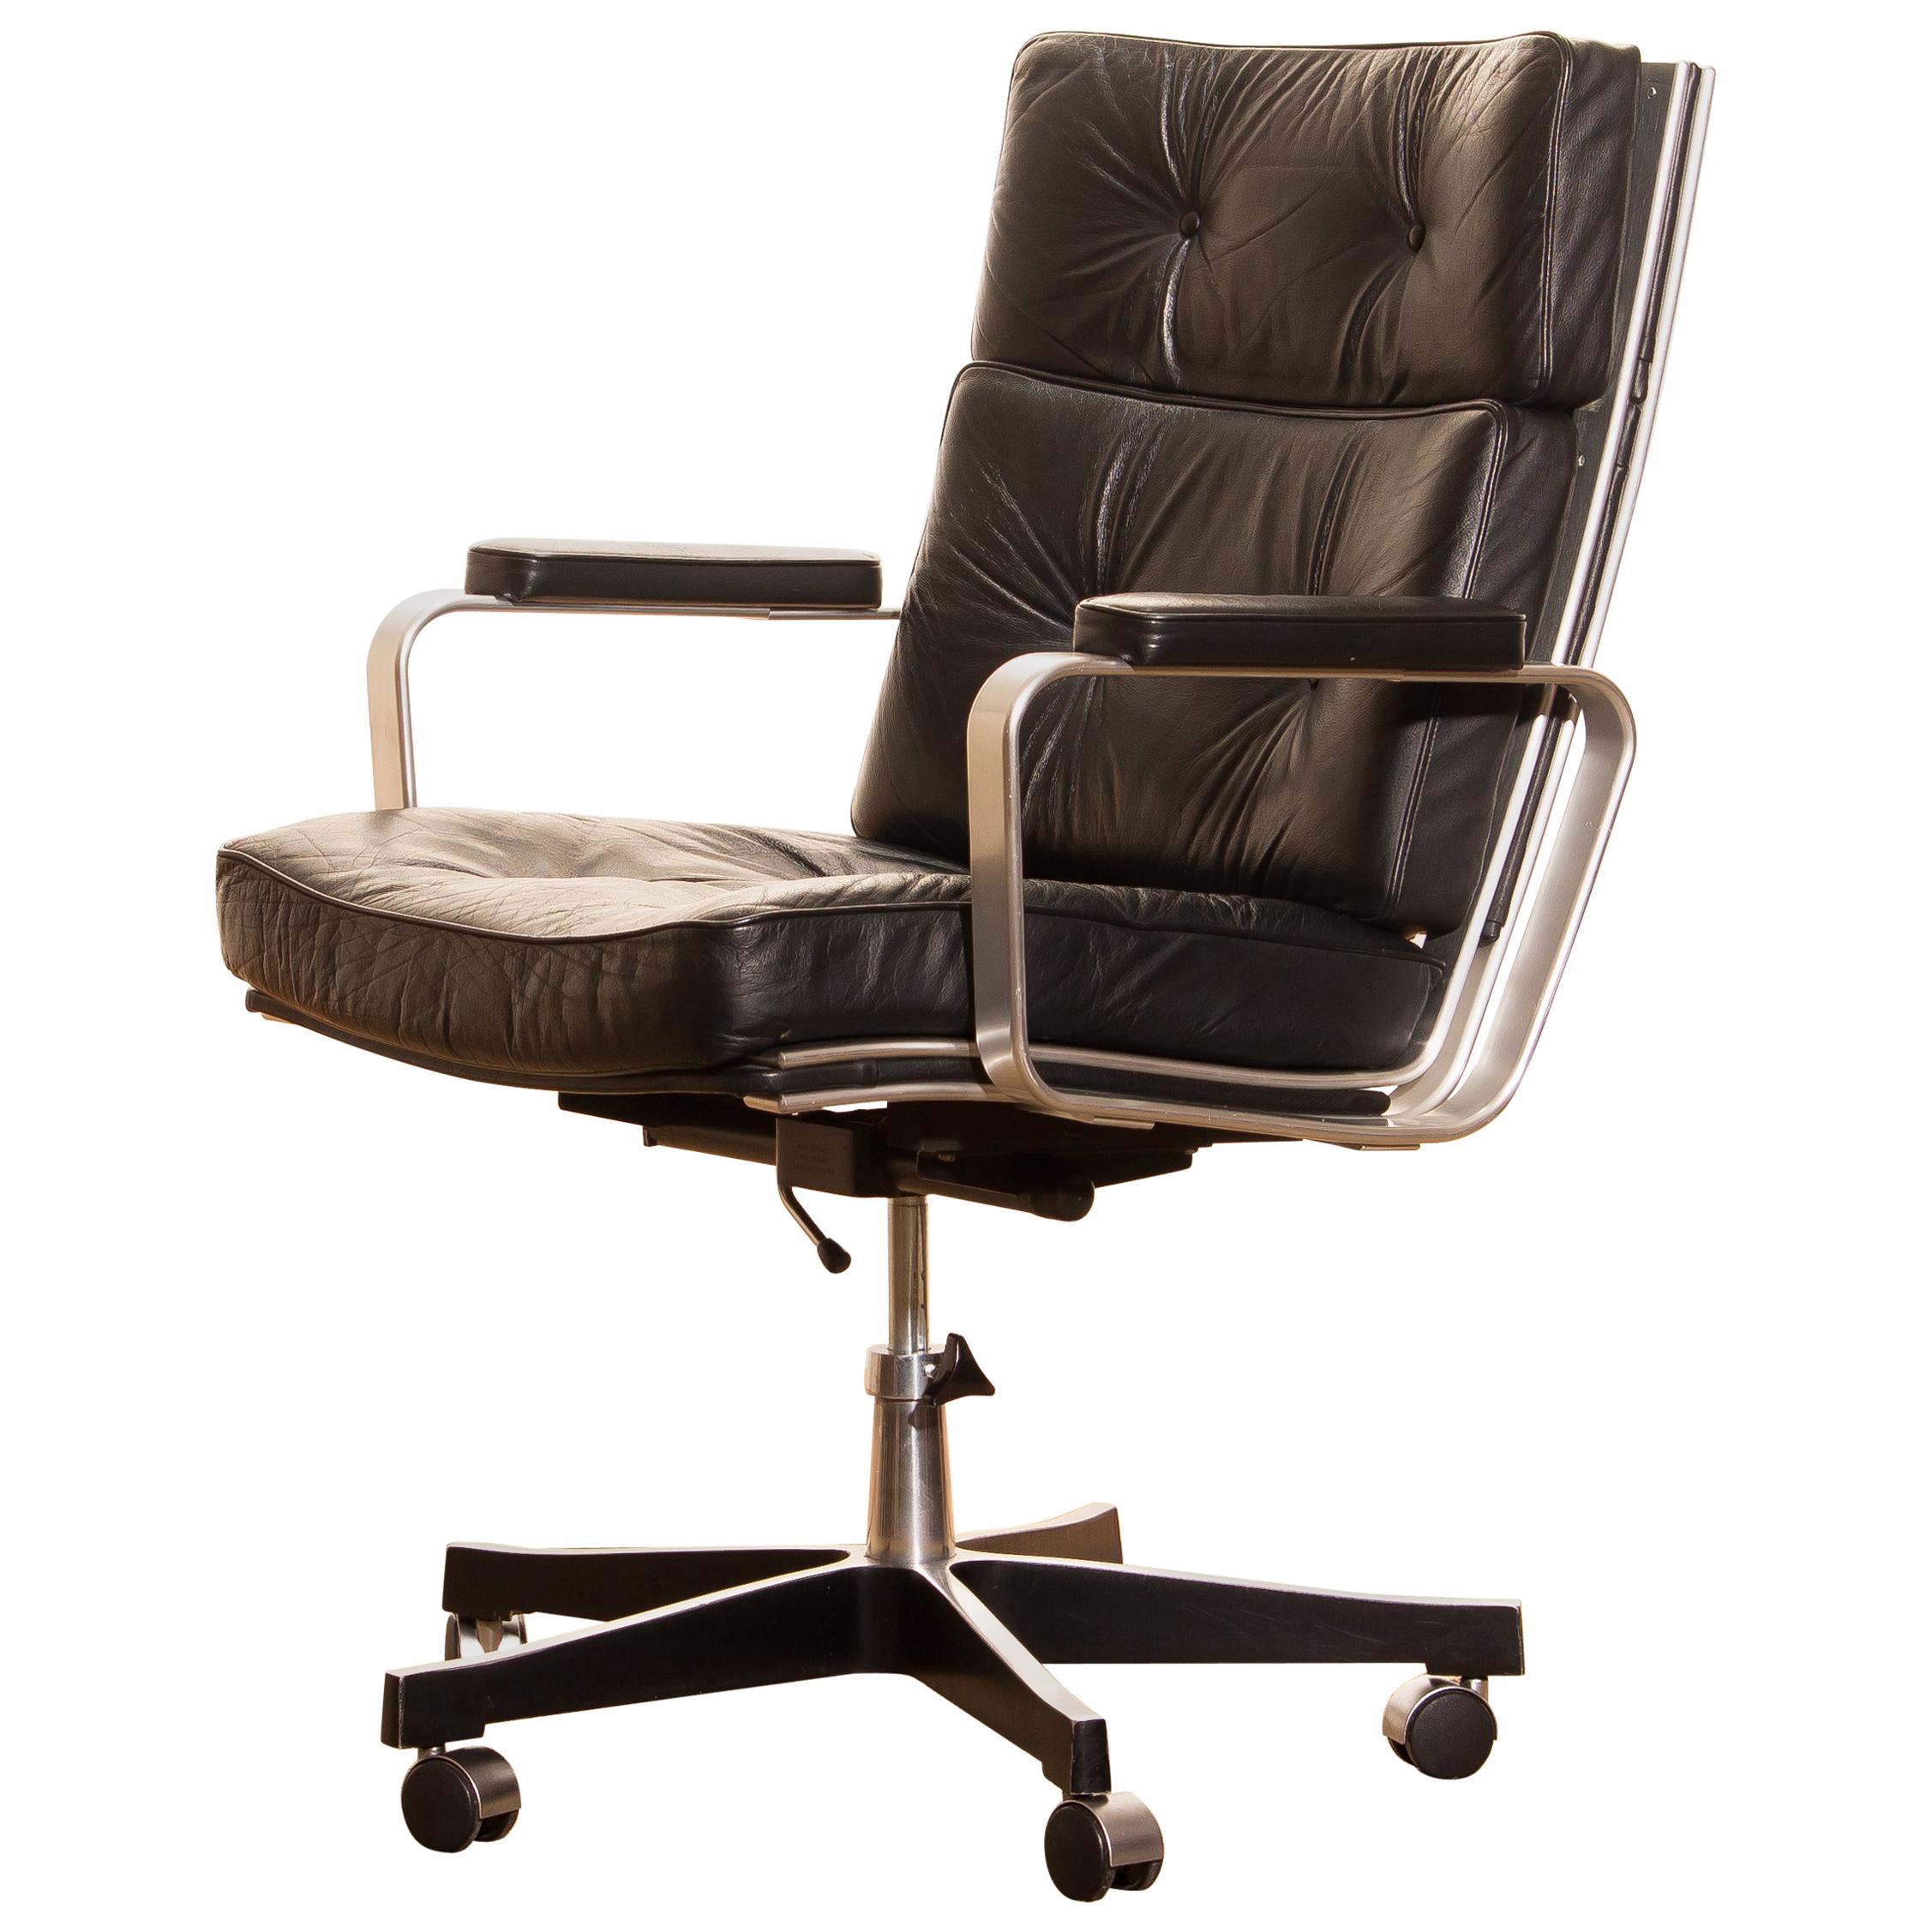 Beautiful adjustable office chair designed by Karl Erik Ekselius for JOC Design.
The nice thick solid black leather with an aluminium frame on wheels all in good condition.
The chair is extremely comfortable and newly filed. 
Period: